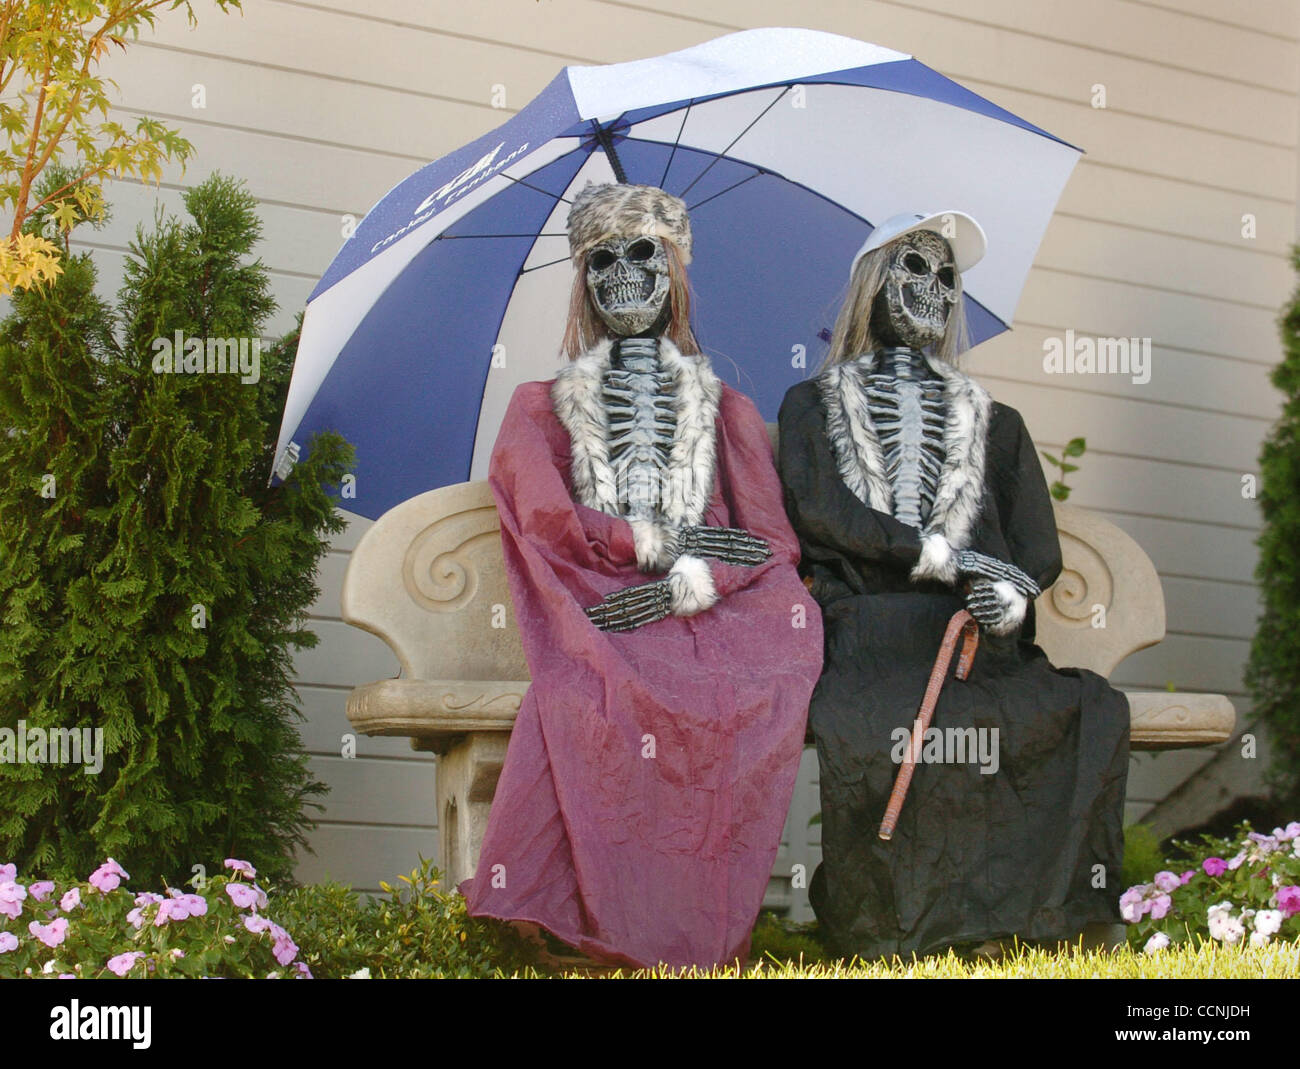 On Brightwood Circe near Leafield Road, this couple were found dressed for the season and prepared for the recent weather on Wednesday, October 20, 2004, in Danville, Calif. (Contra Costa Times/Susan Tripp Pollard) Stock Photo